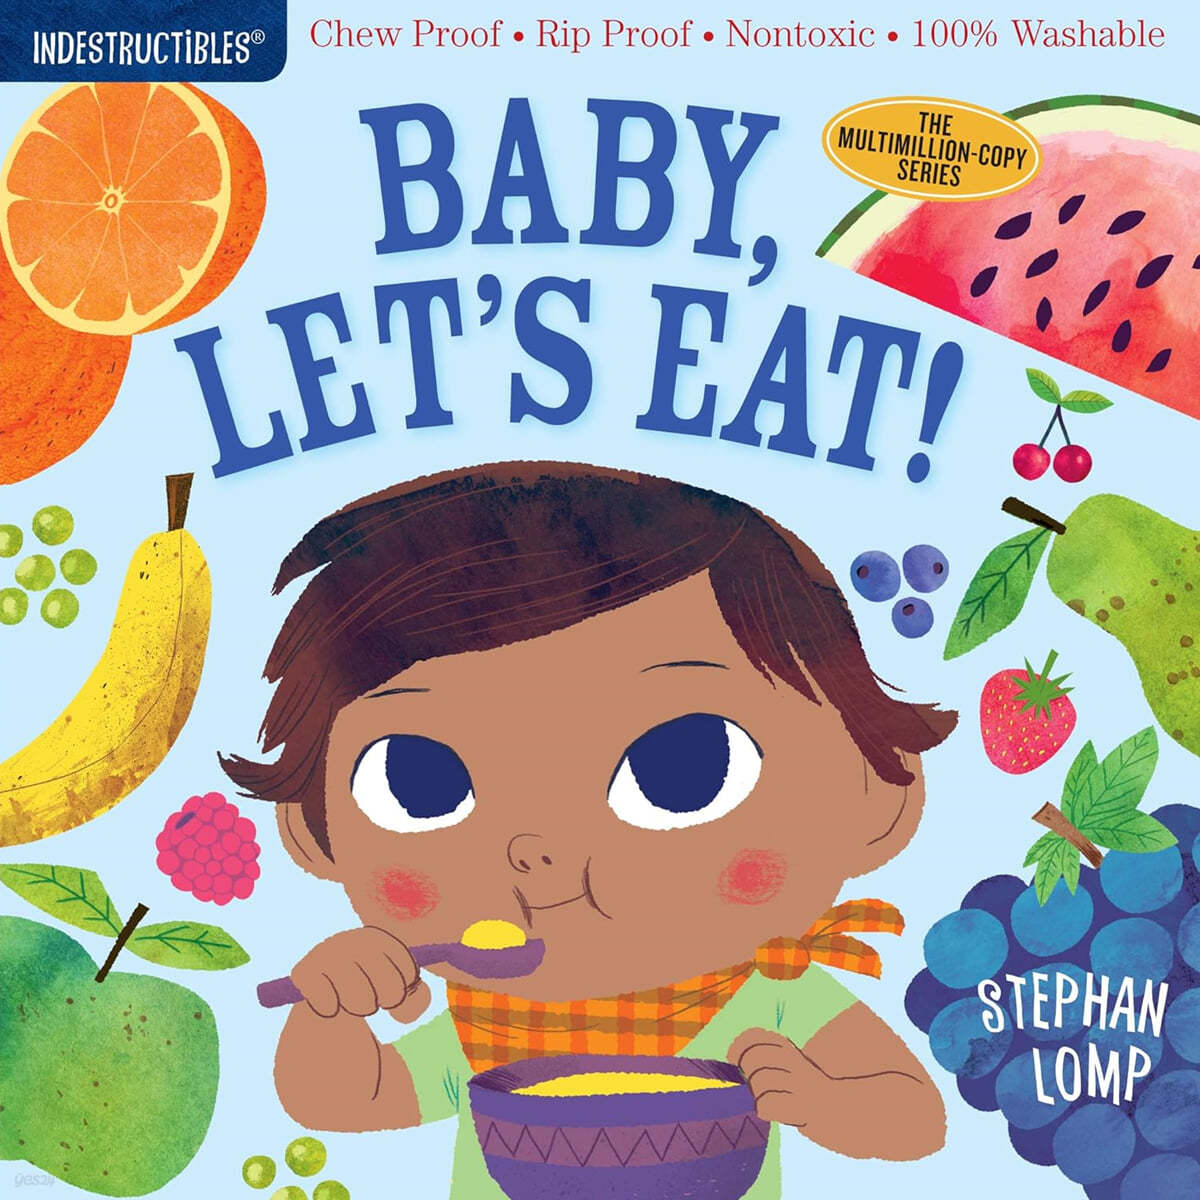 Indestructibles: Baby, Let&#39;s Eat!: Chew Proof - Rip Proof - Nontoxic - 100% Washable (Book for Babies, Newborn Books, Safe to Chew)